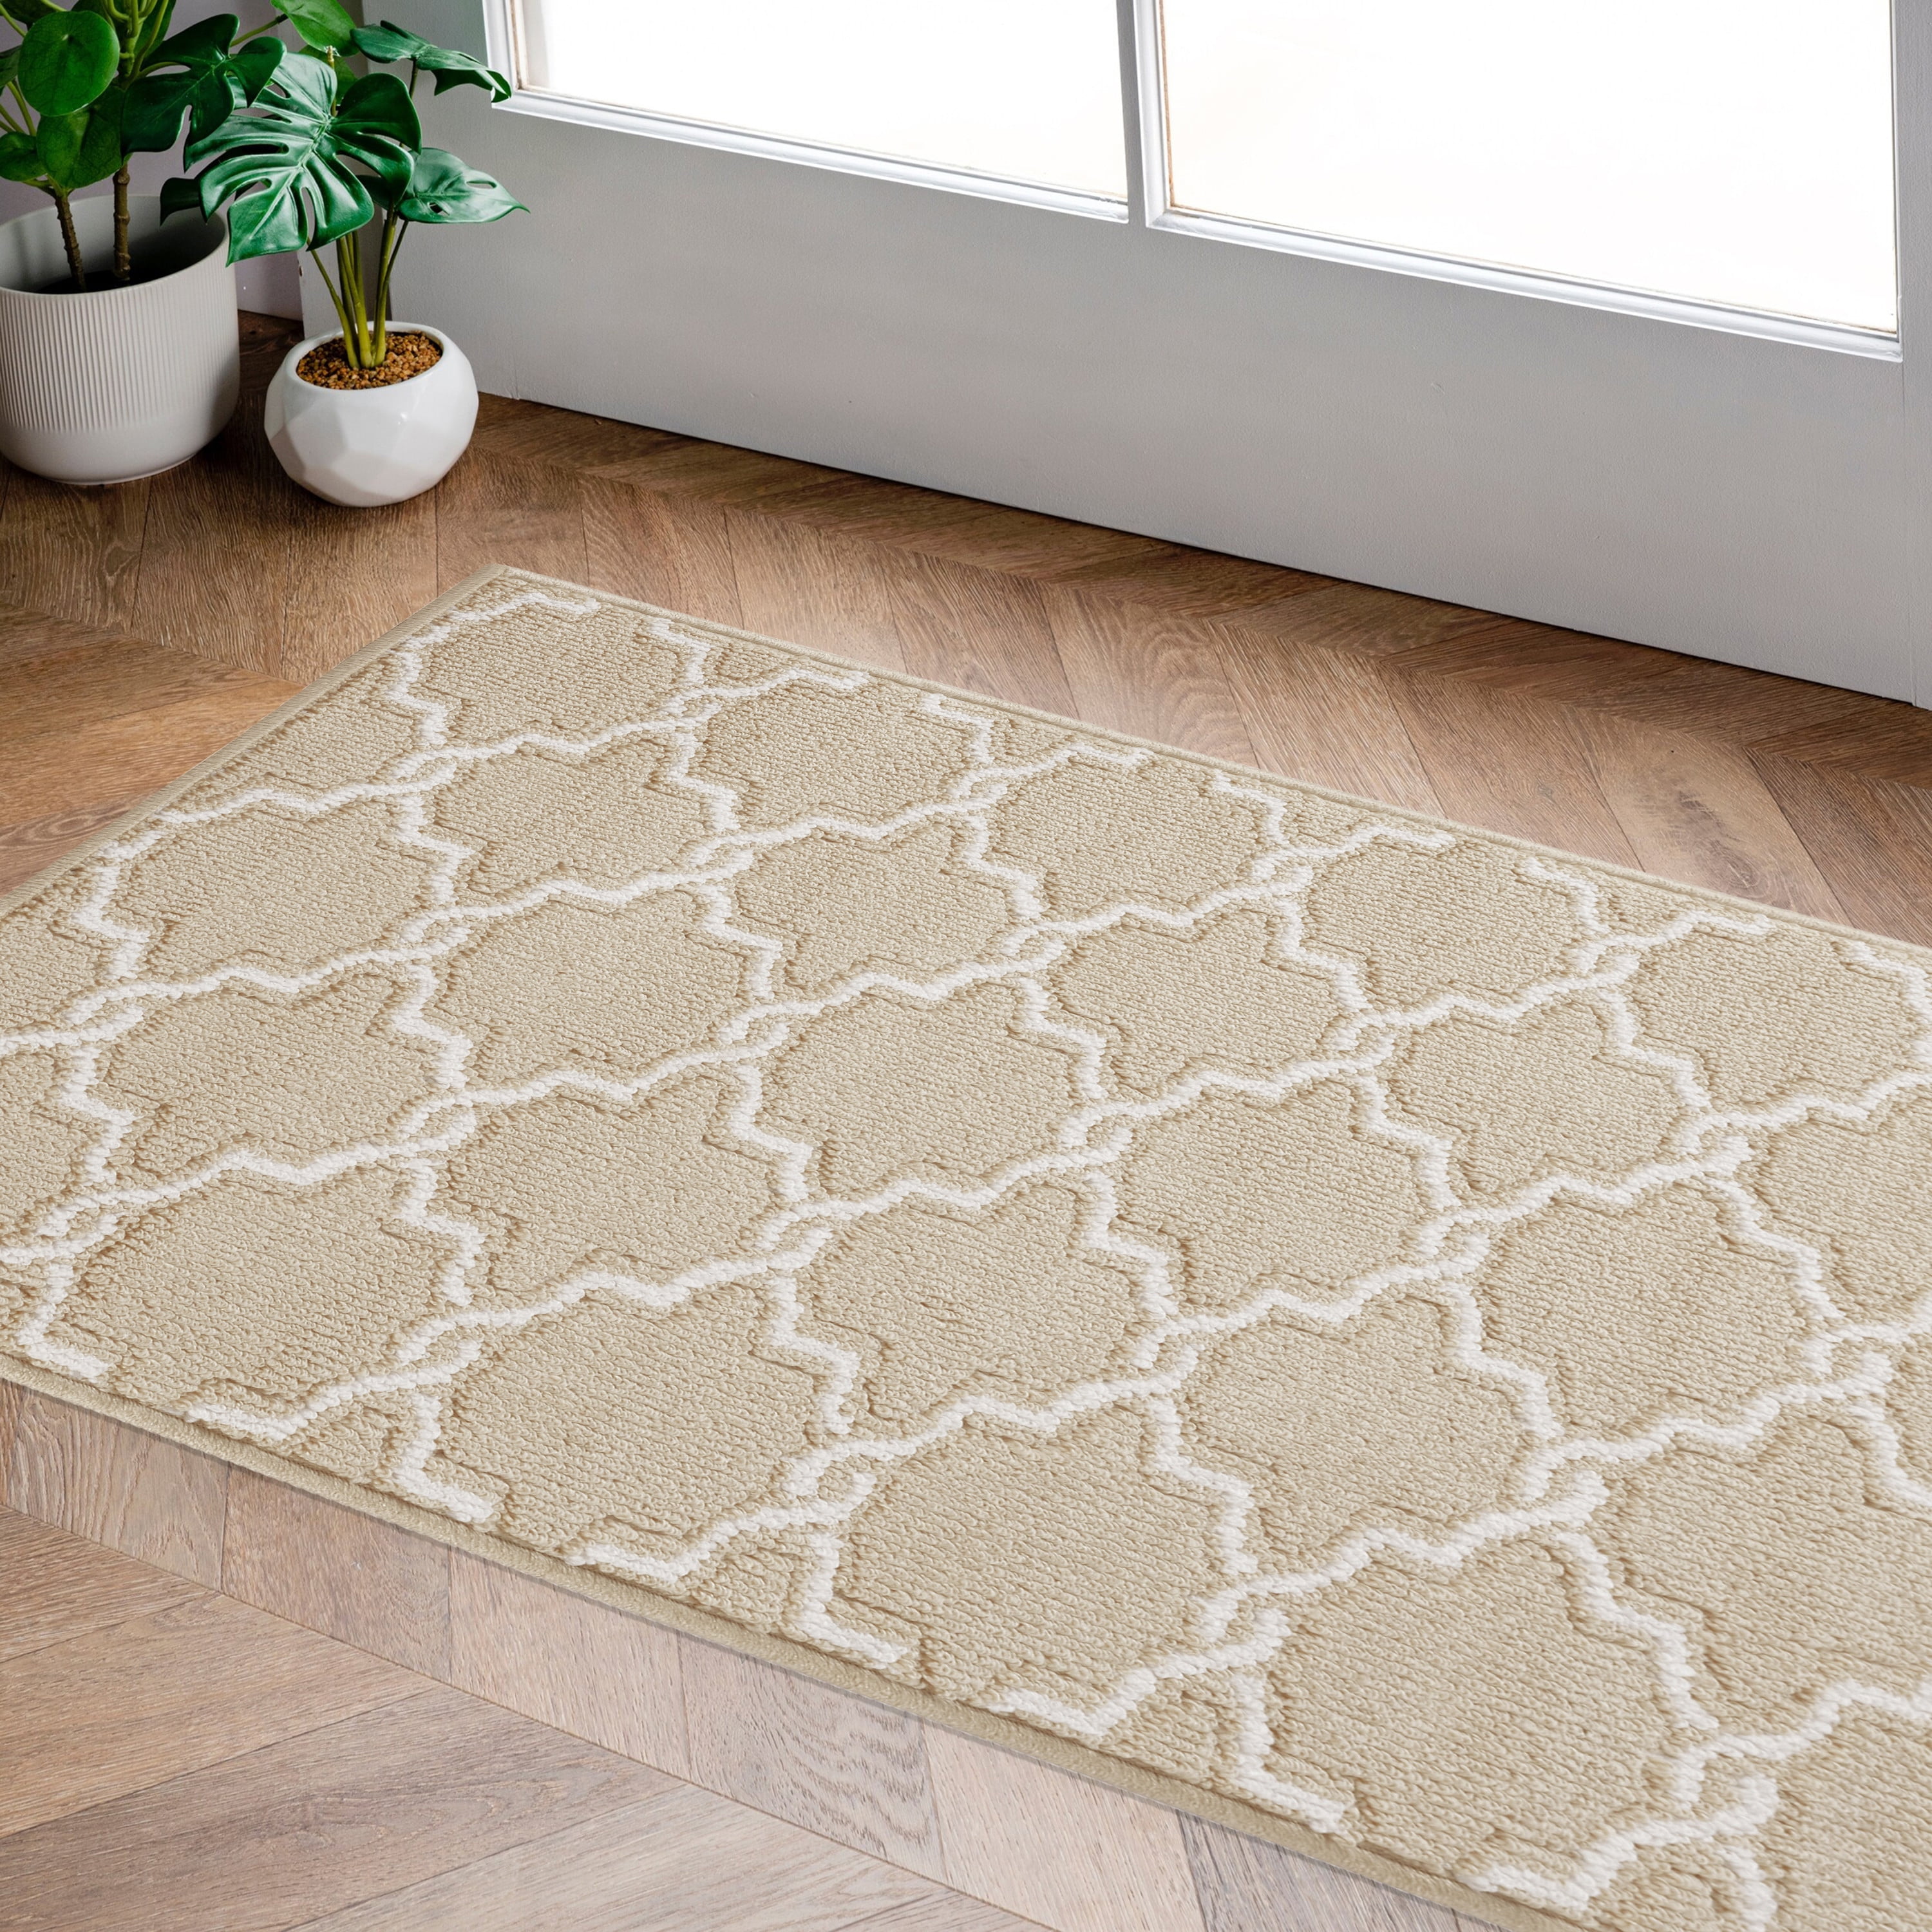 Lahome White Washable Rugs for Entryway, Beige Indoor Outdoor Carpets with  Rubber Backing, Botanical Low Profile Bedroom Rugs Floral Non Skid